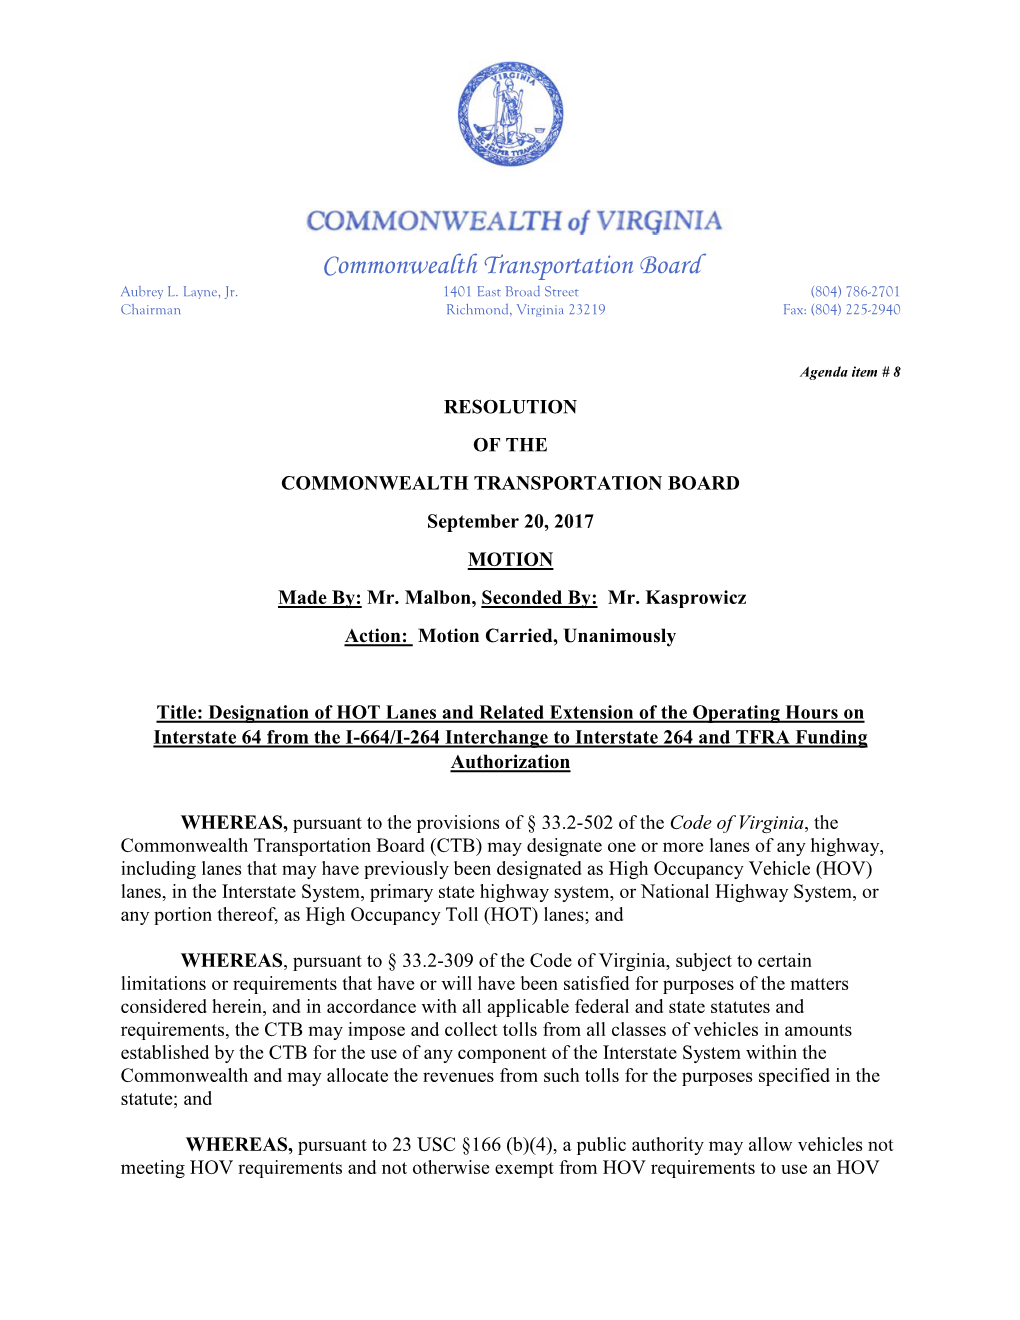 Designation of HOT Lanes and Related Extension of the Operating Hours on Interstate 64